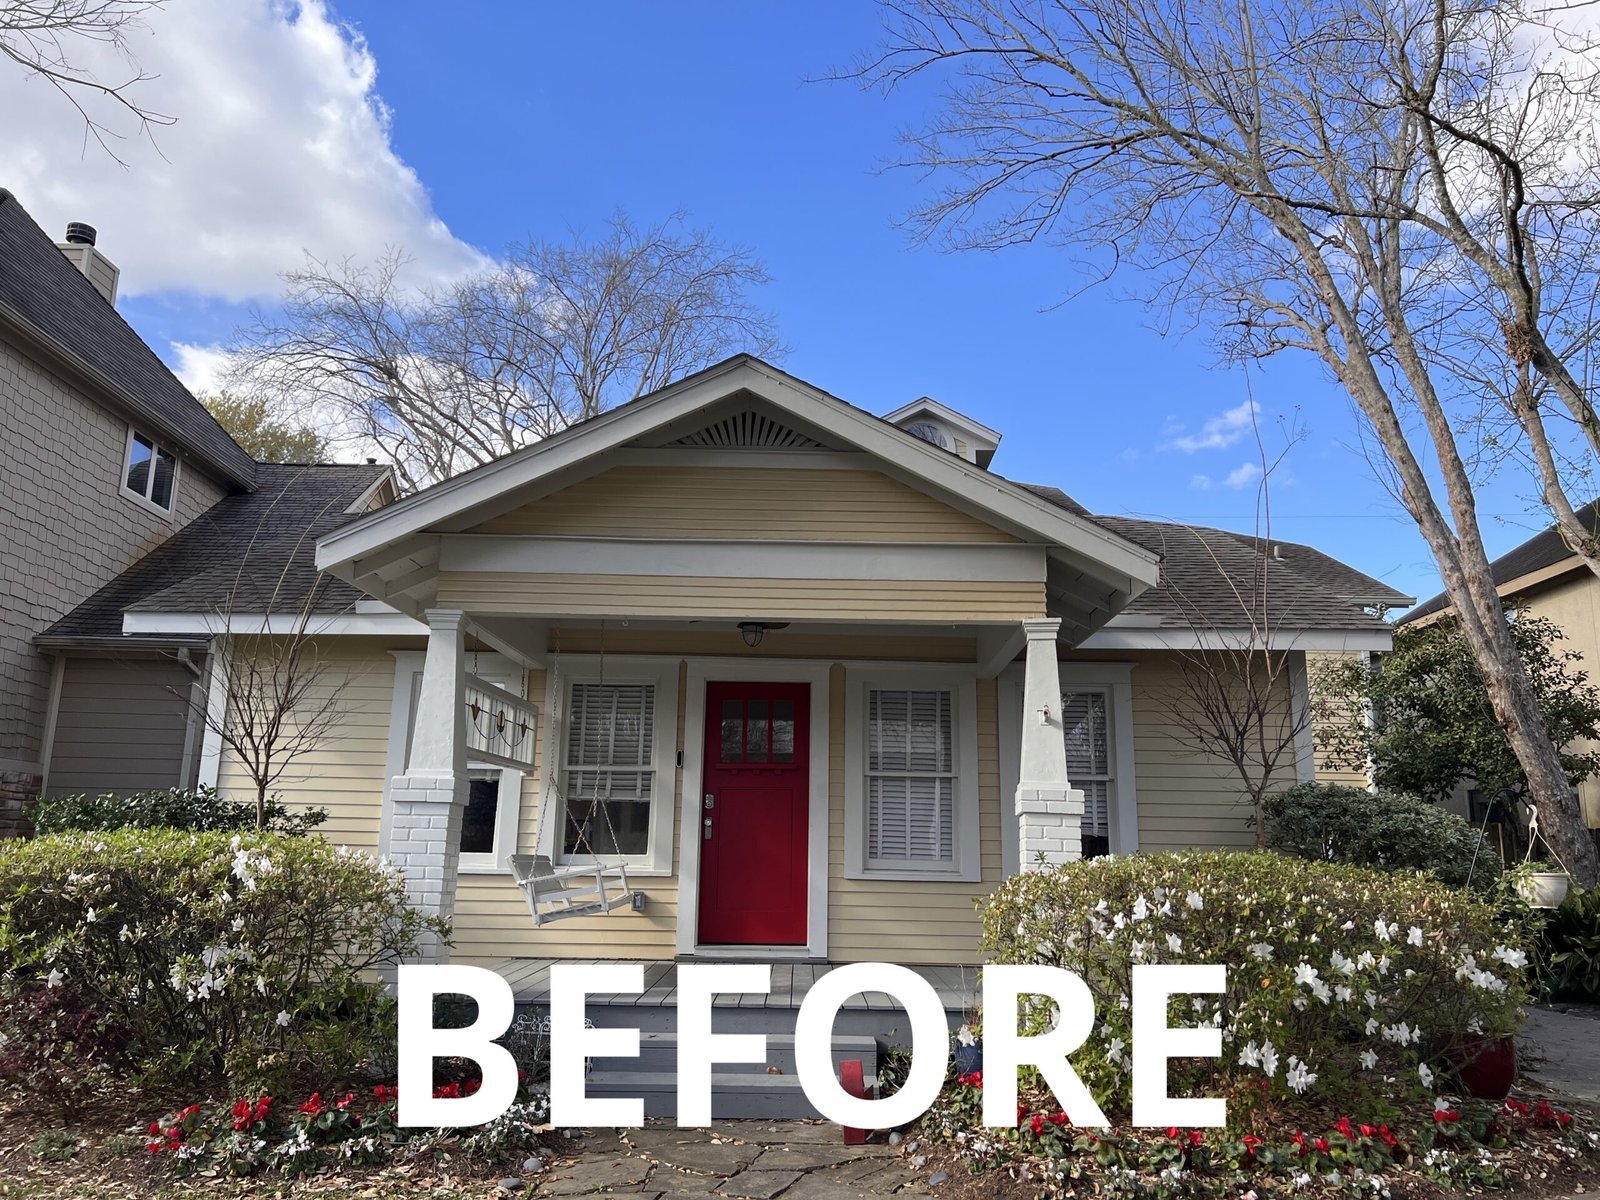 A before and after of an exterior house painting project.